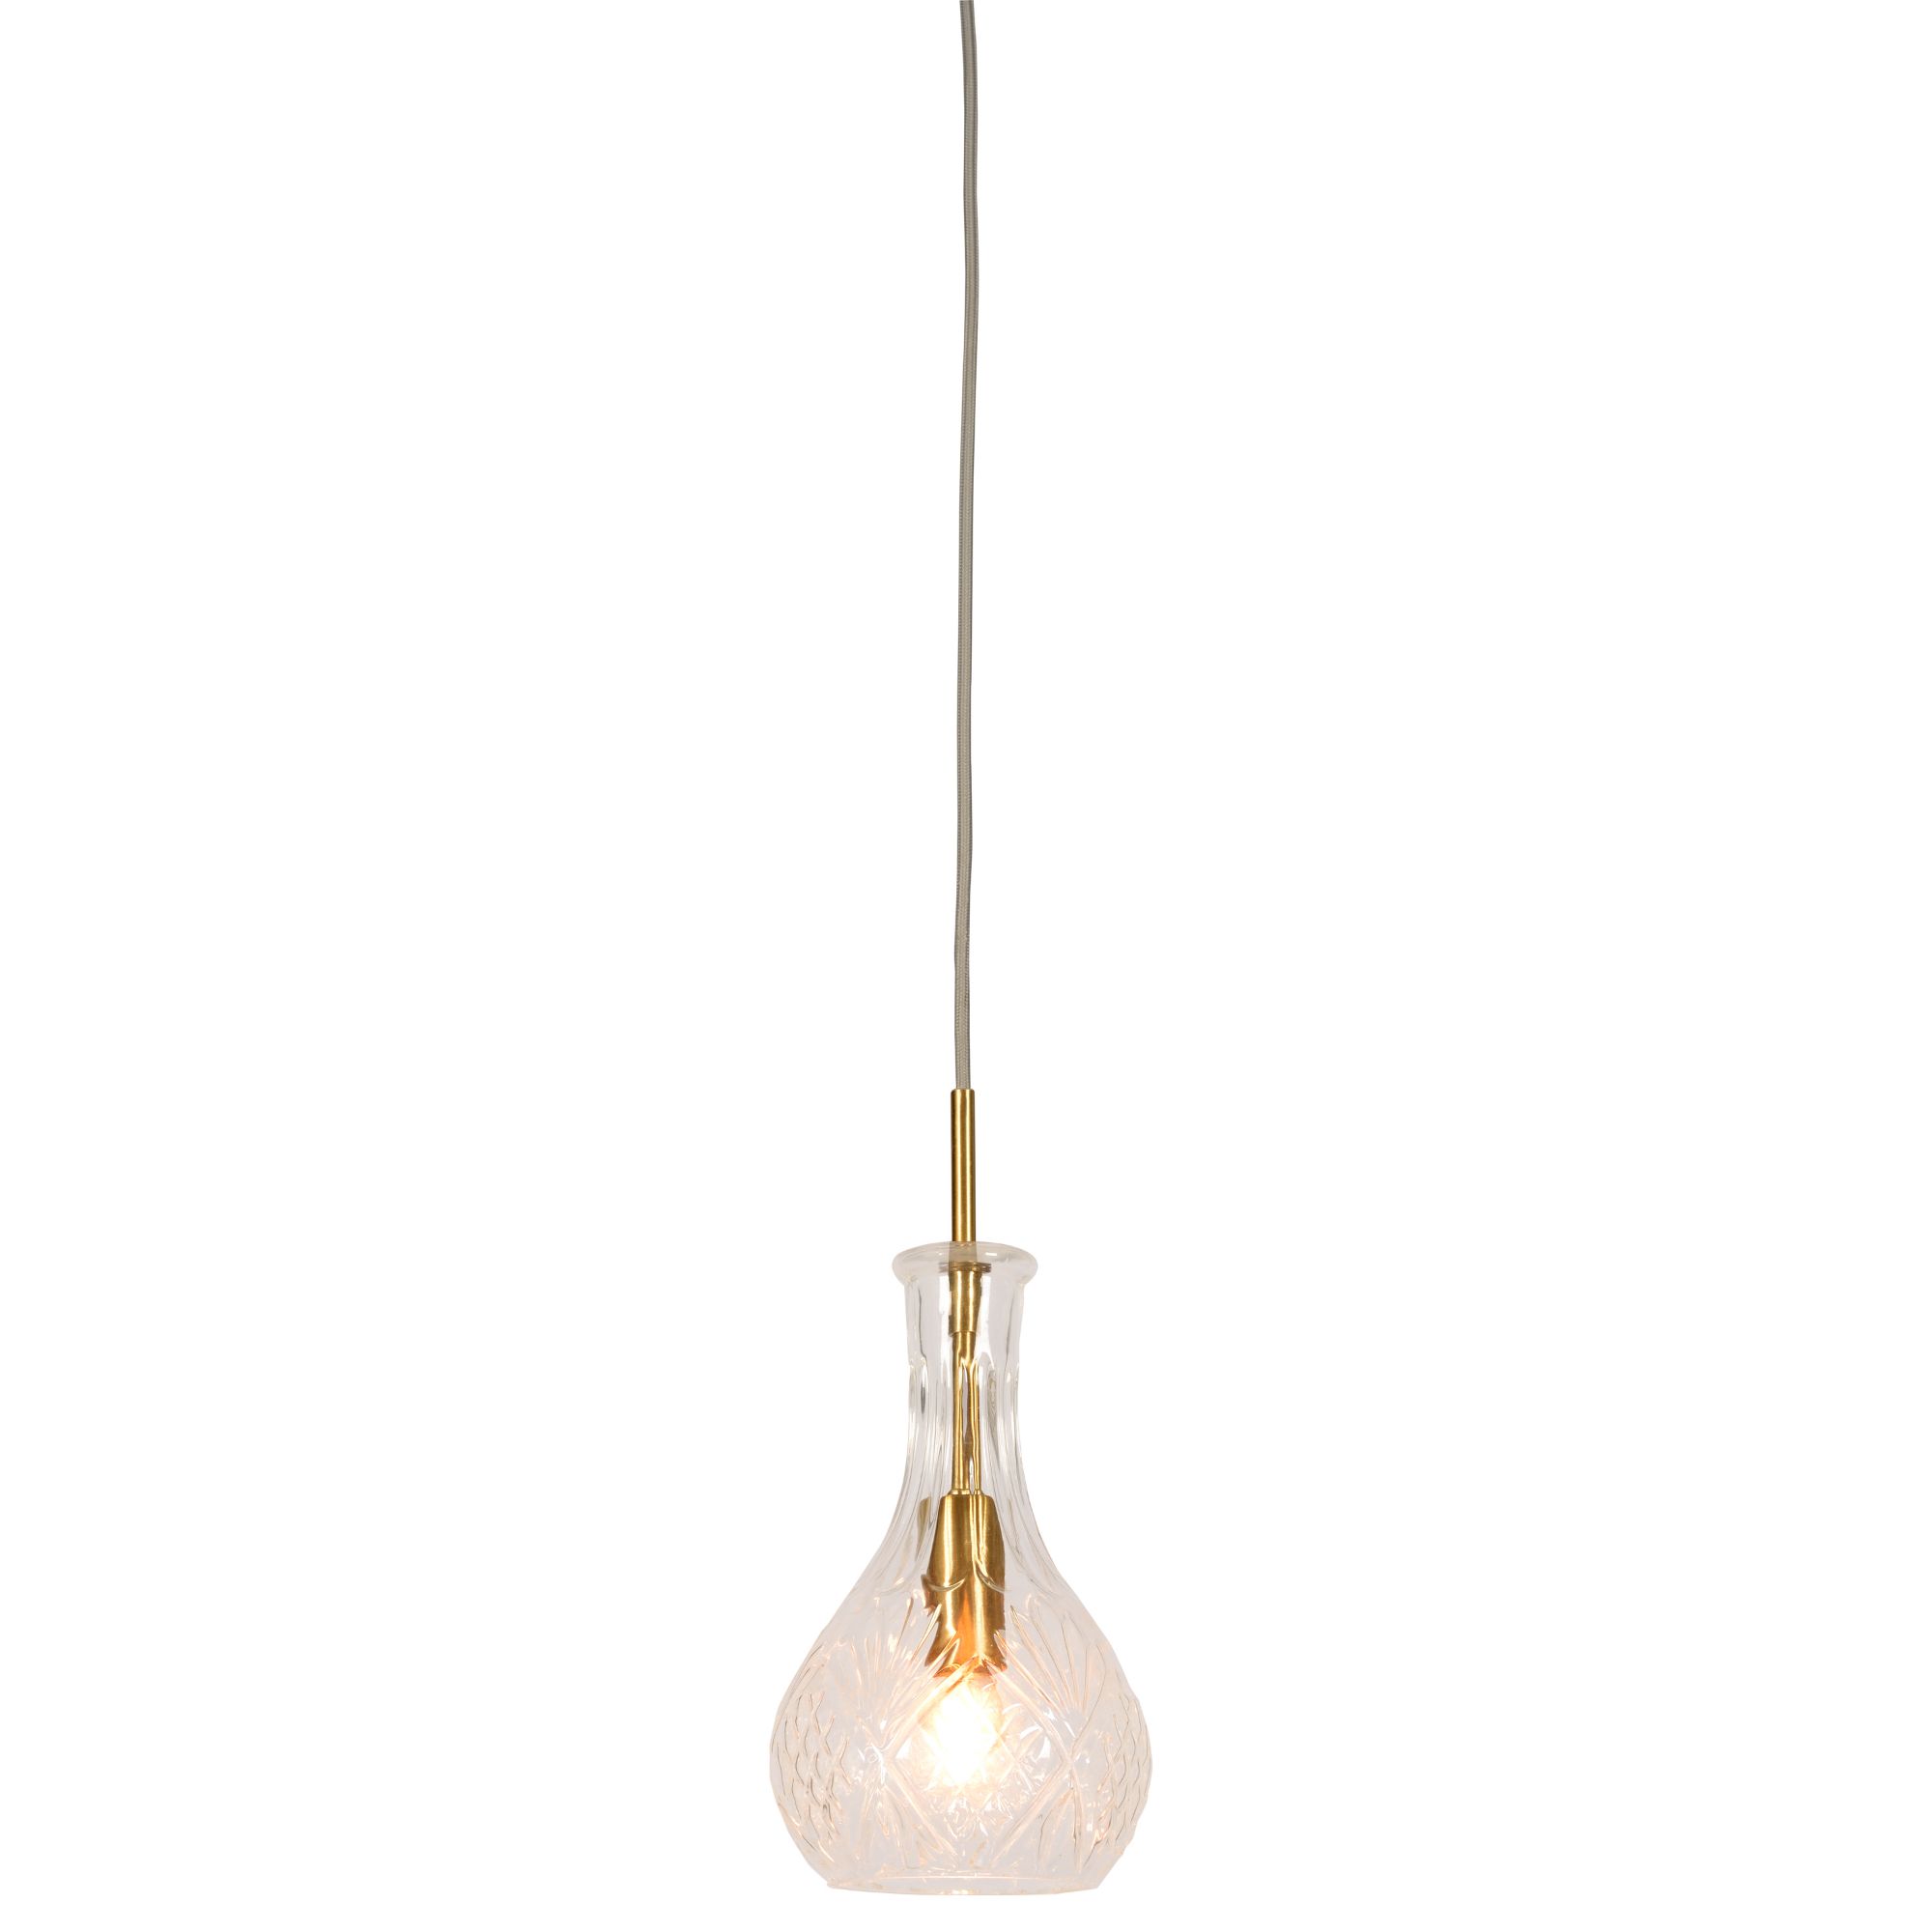 it's about RoMi - Hanglamp glas Brussels transp/goud druppel